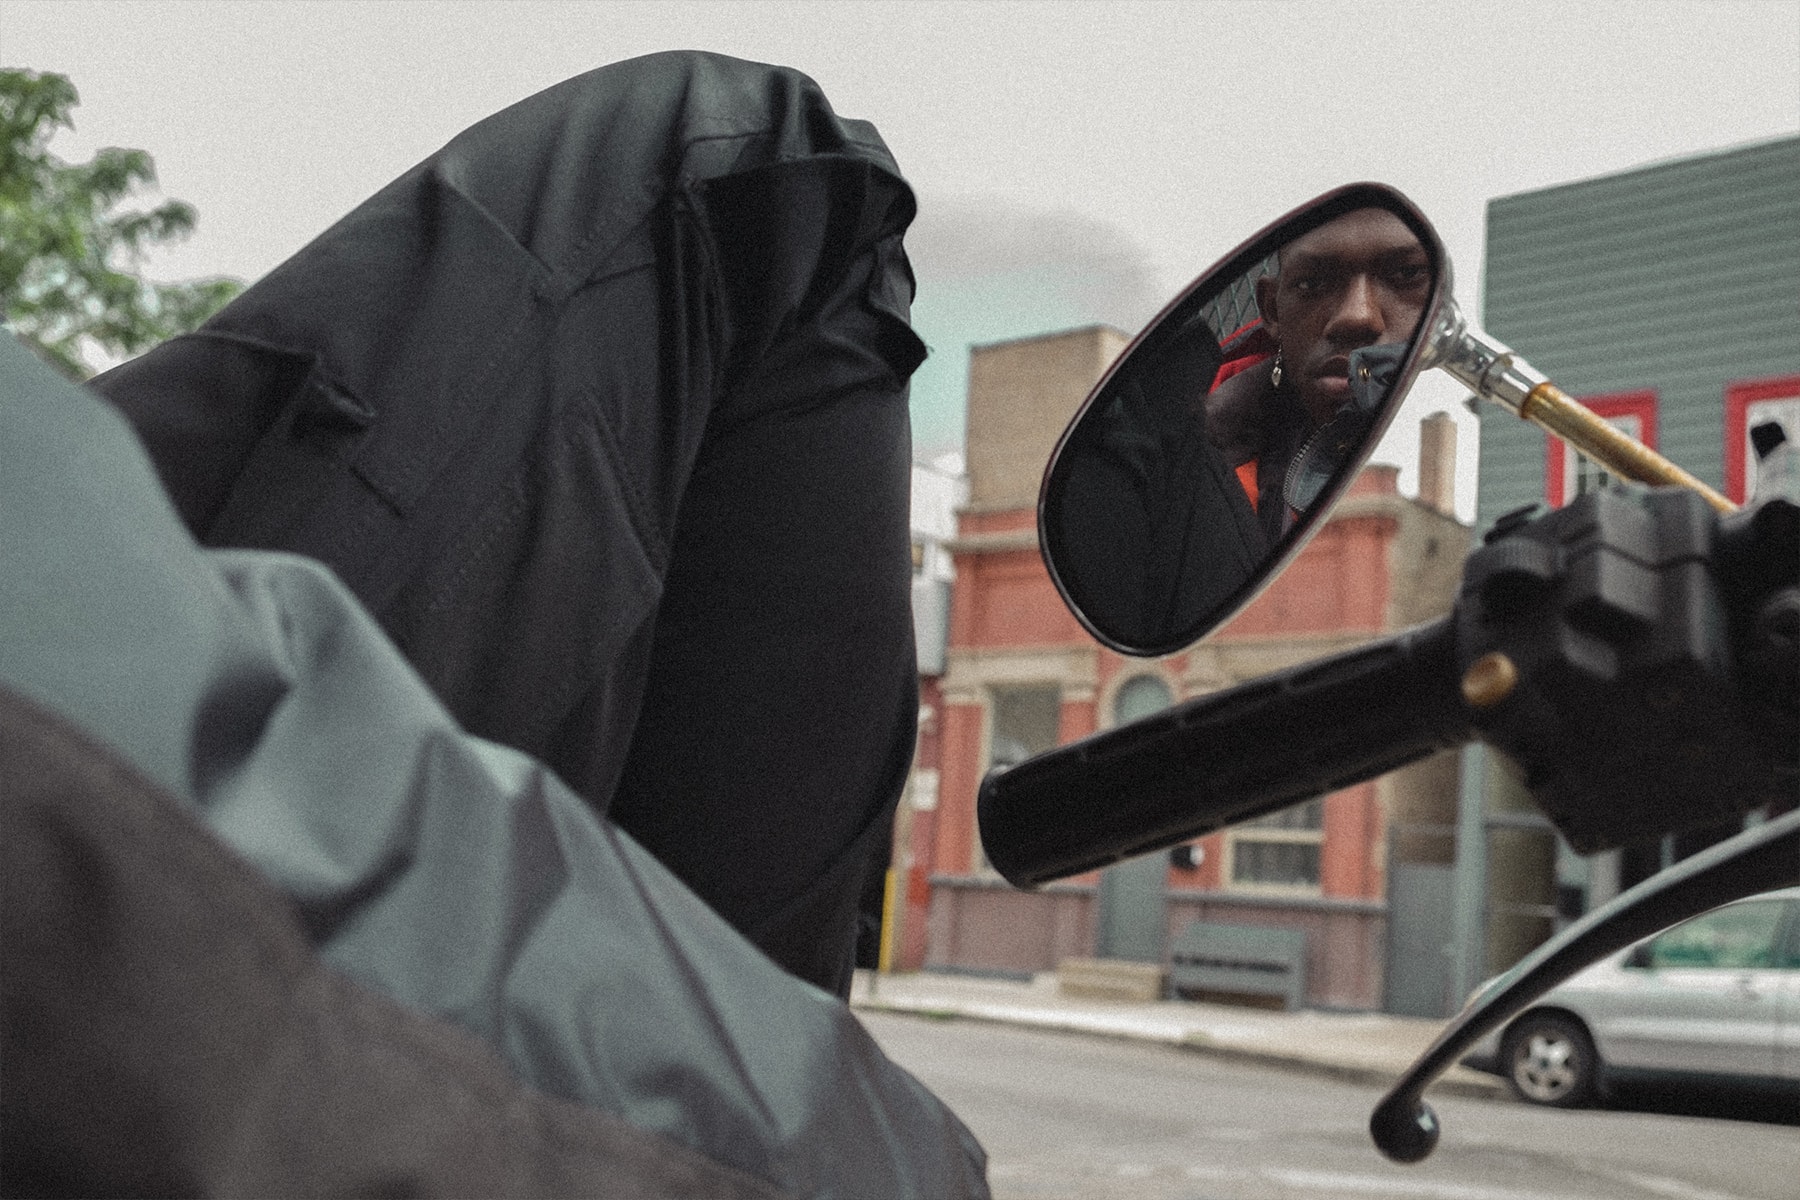 Notre Junya Watanabe Editorial the north face levi's karrimor release info